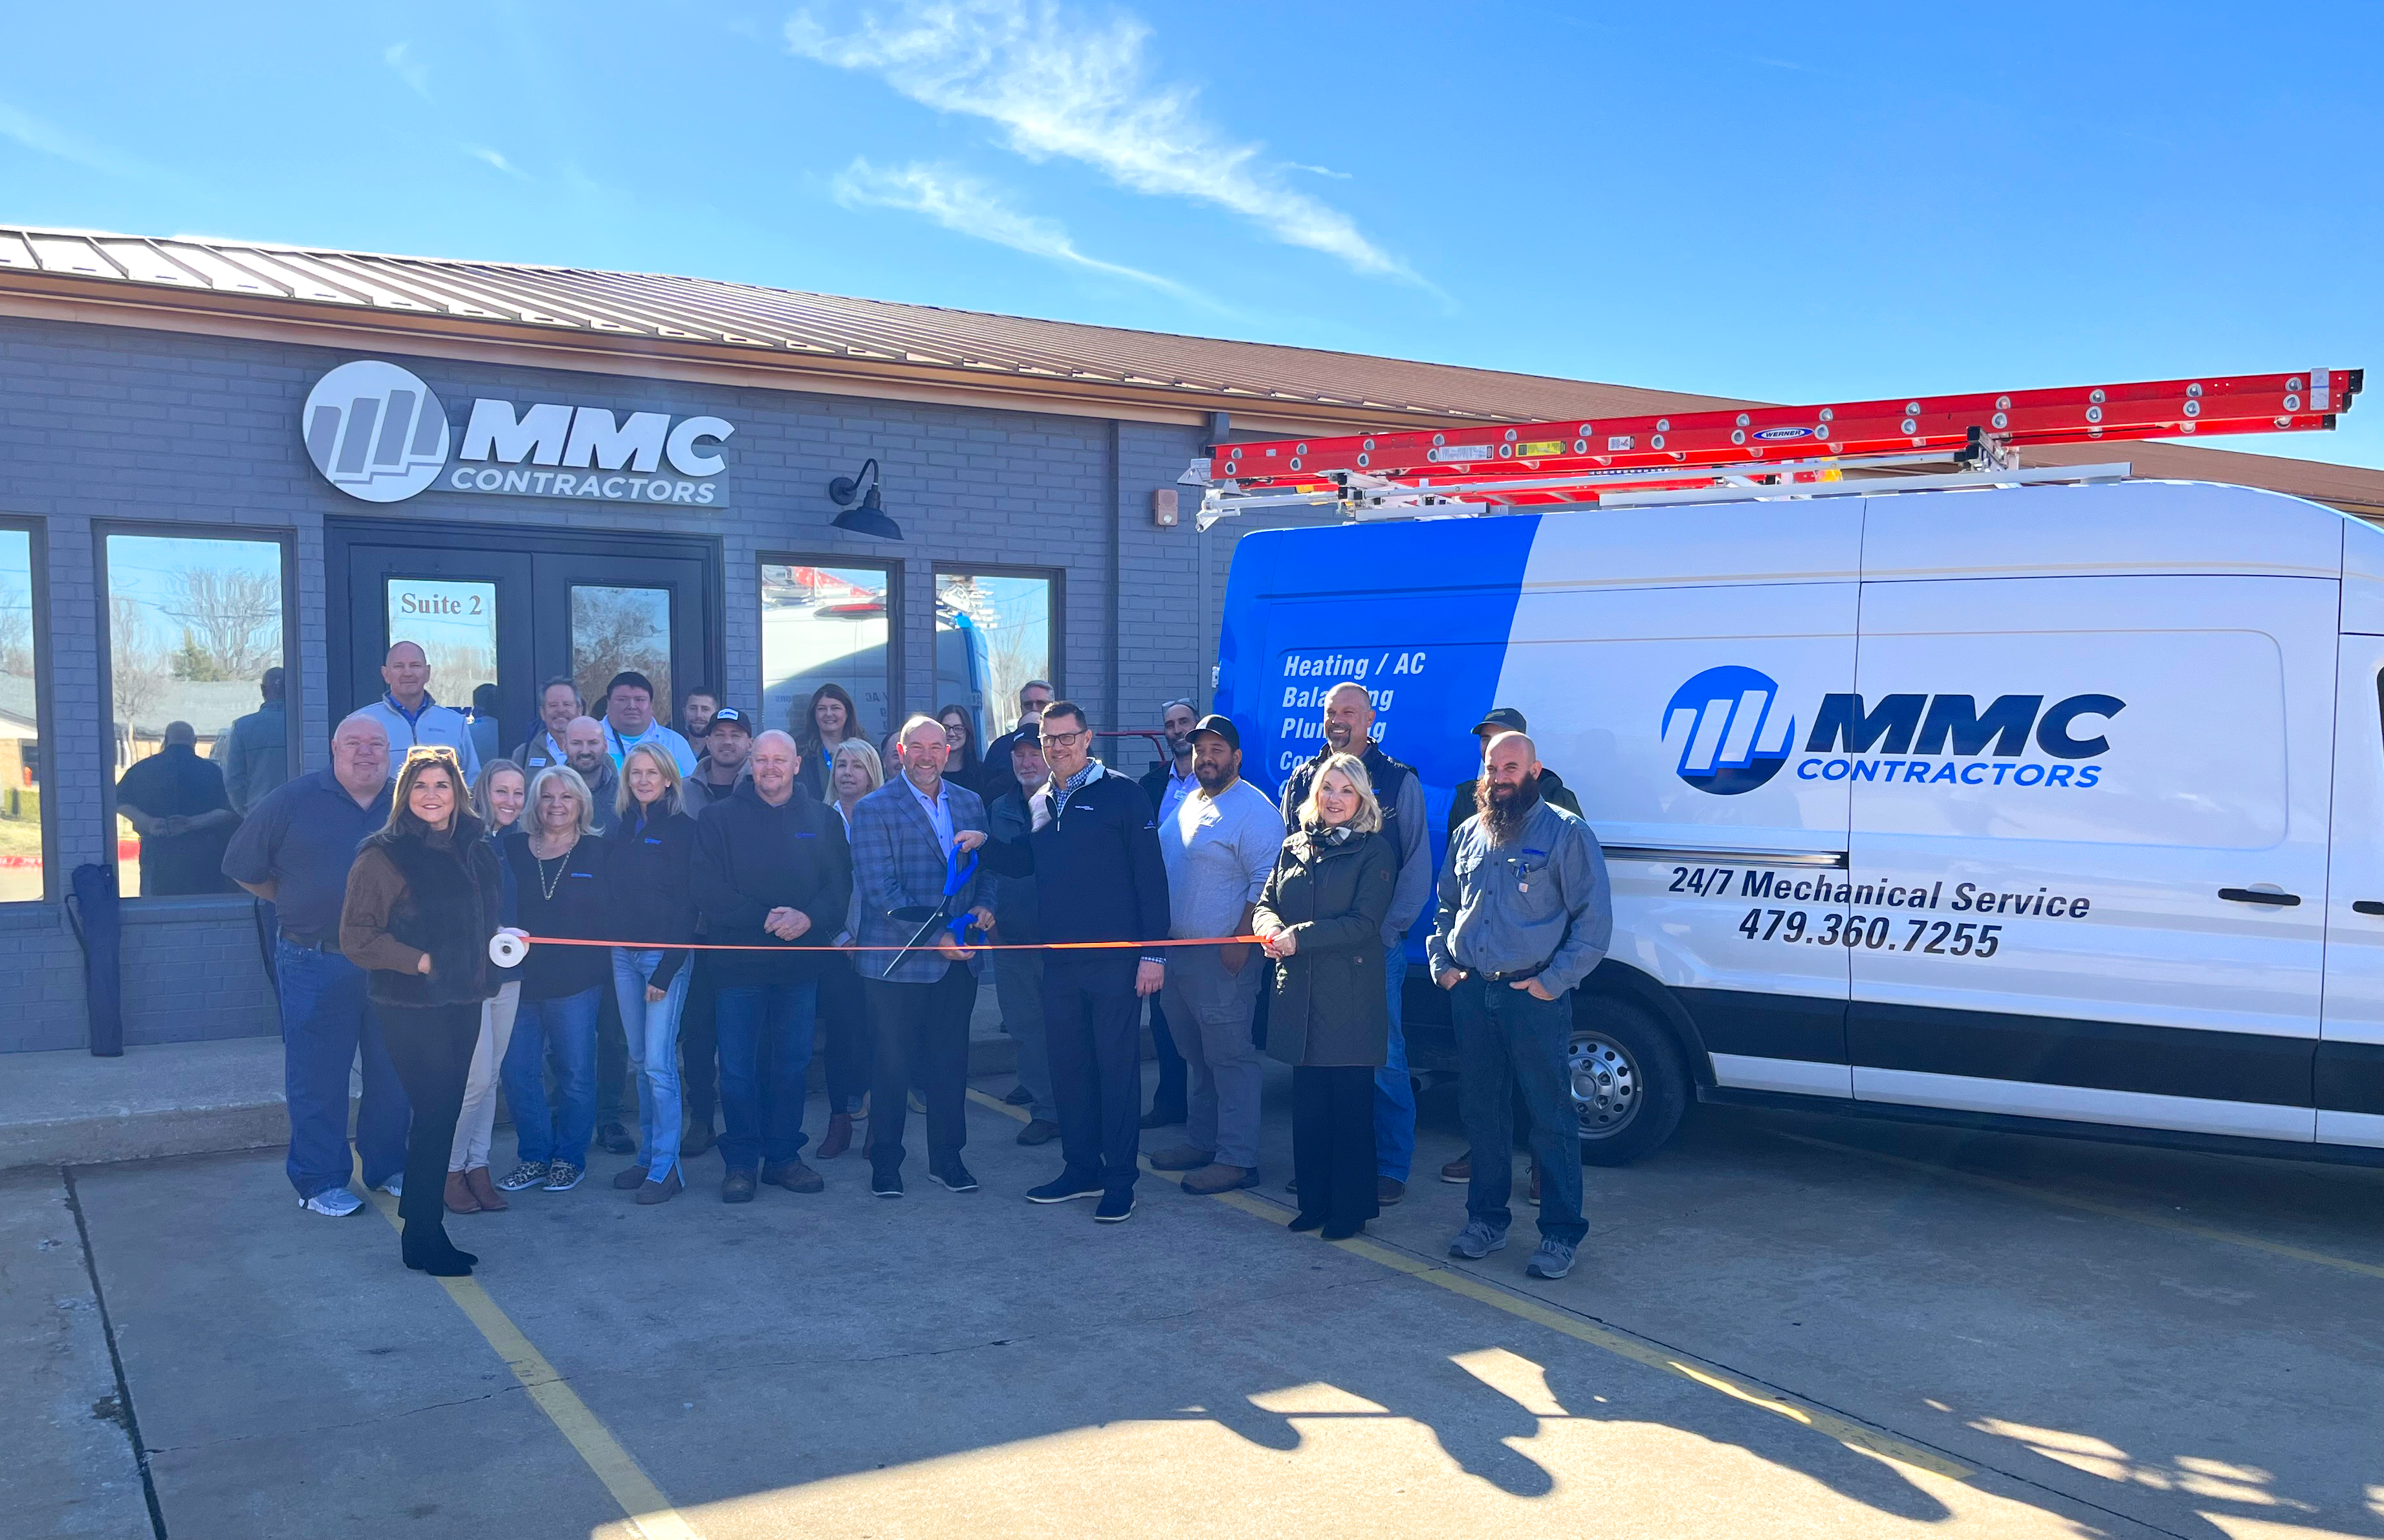 MMC Contractors Opens Office and Hosts Ribbon Cutting in Bentonville, Arkansas